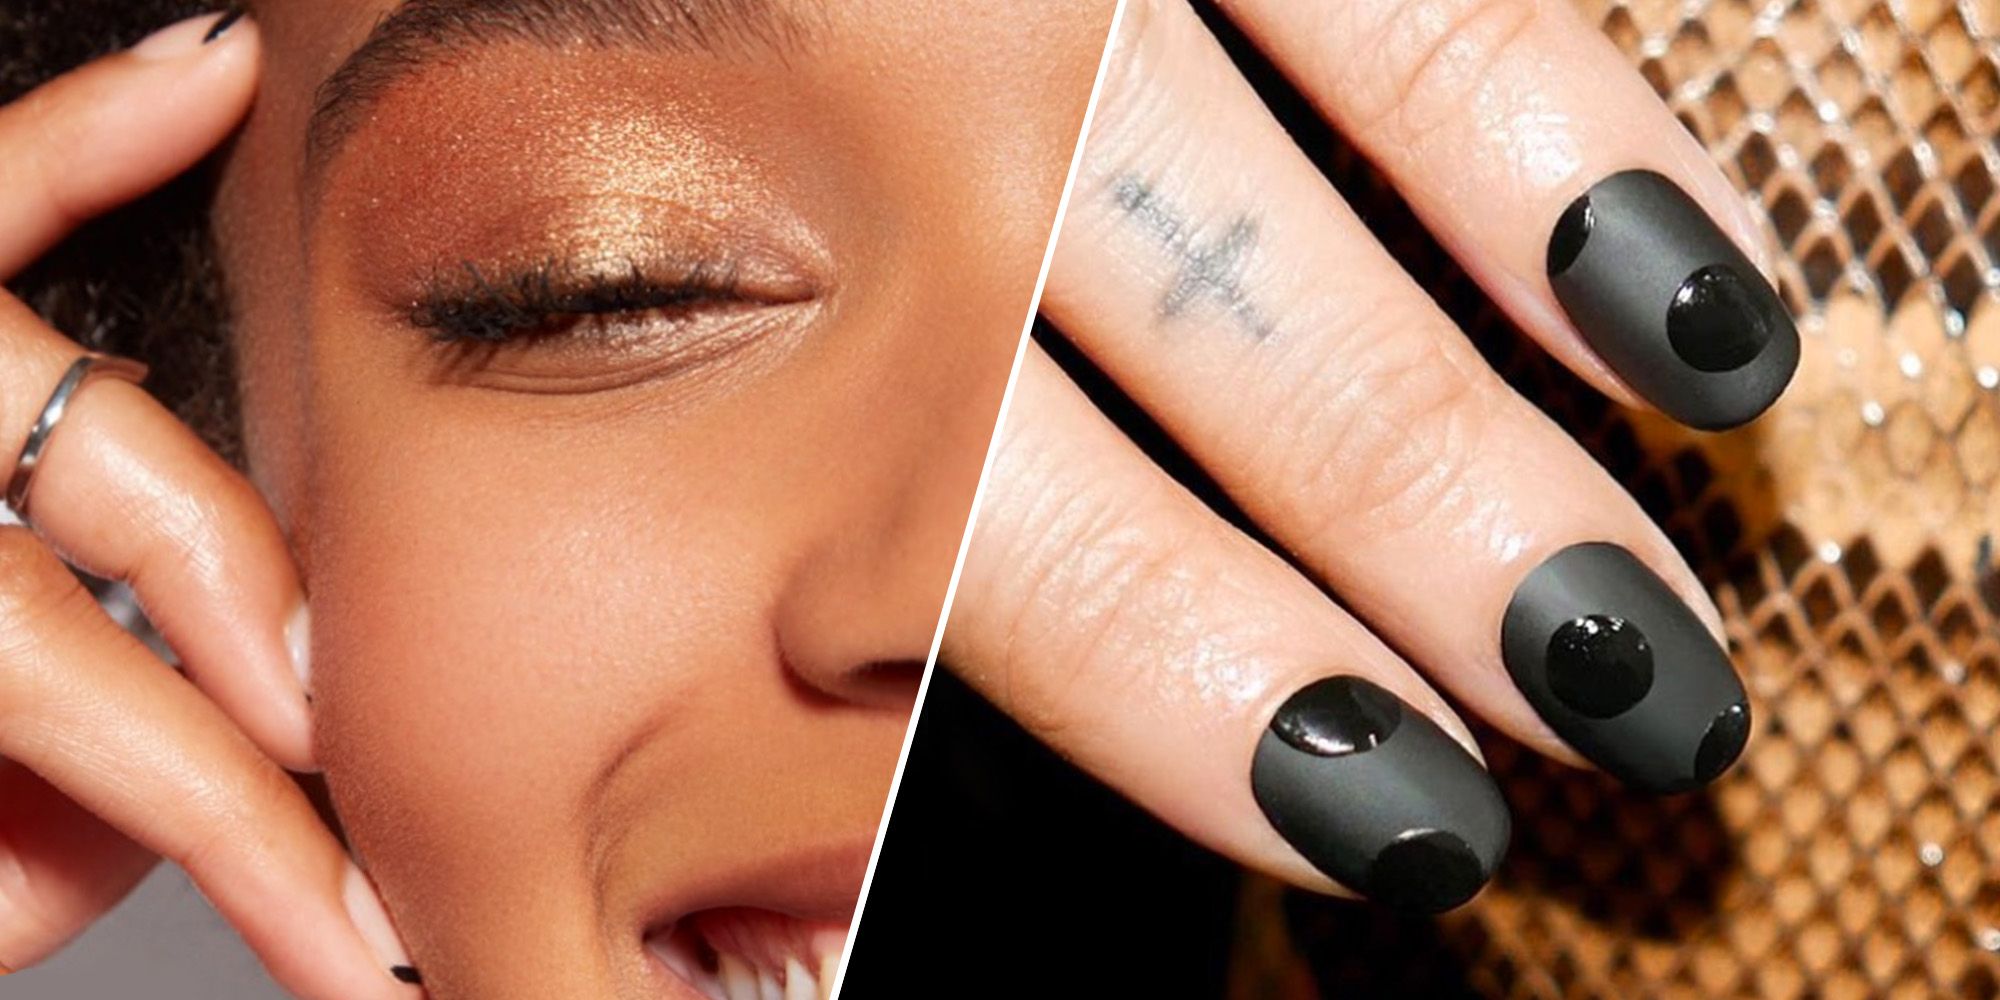 The Best Black Nails Designs To Screenshot Now